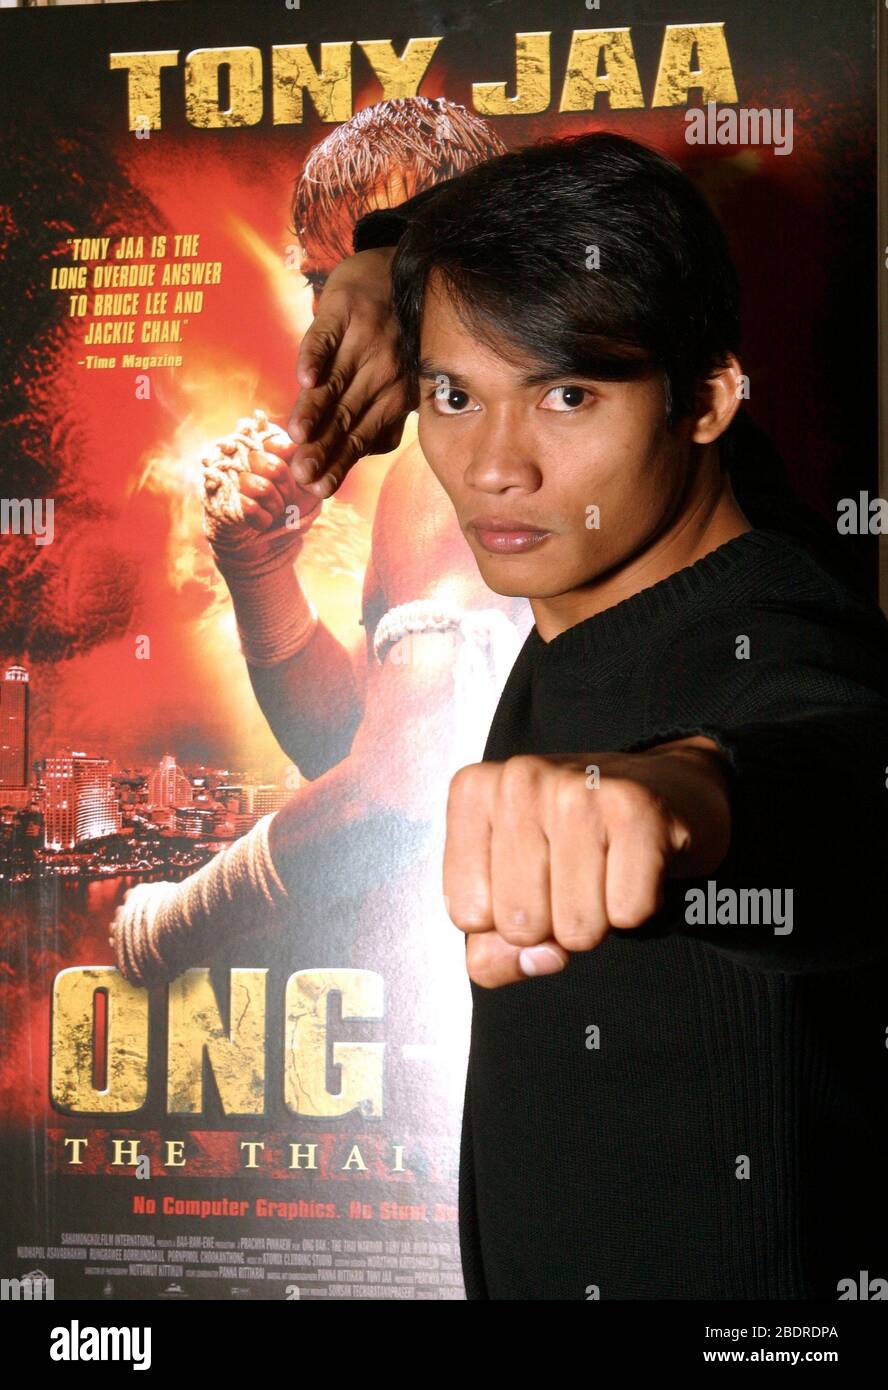 Tony Jaa of the film "Ong-Bak"photographed at the Ritz Carlton in  Philadelphia. February 10, 2005 Credit: Scott Weiner/MediaPunch Stock Photo  - Alamy